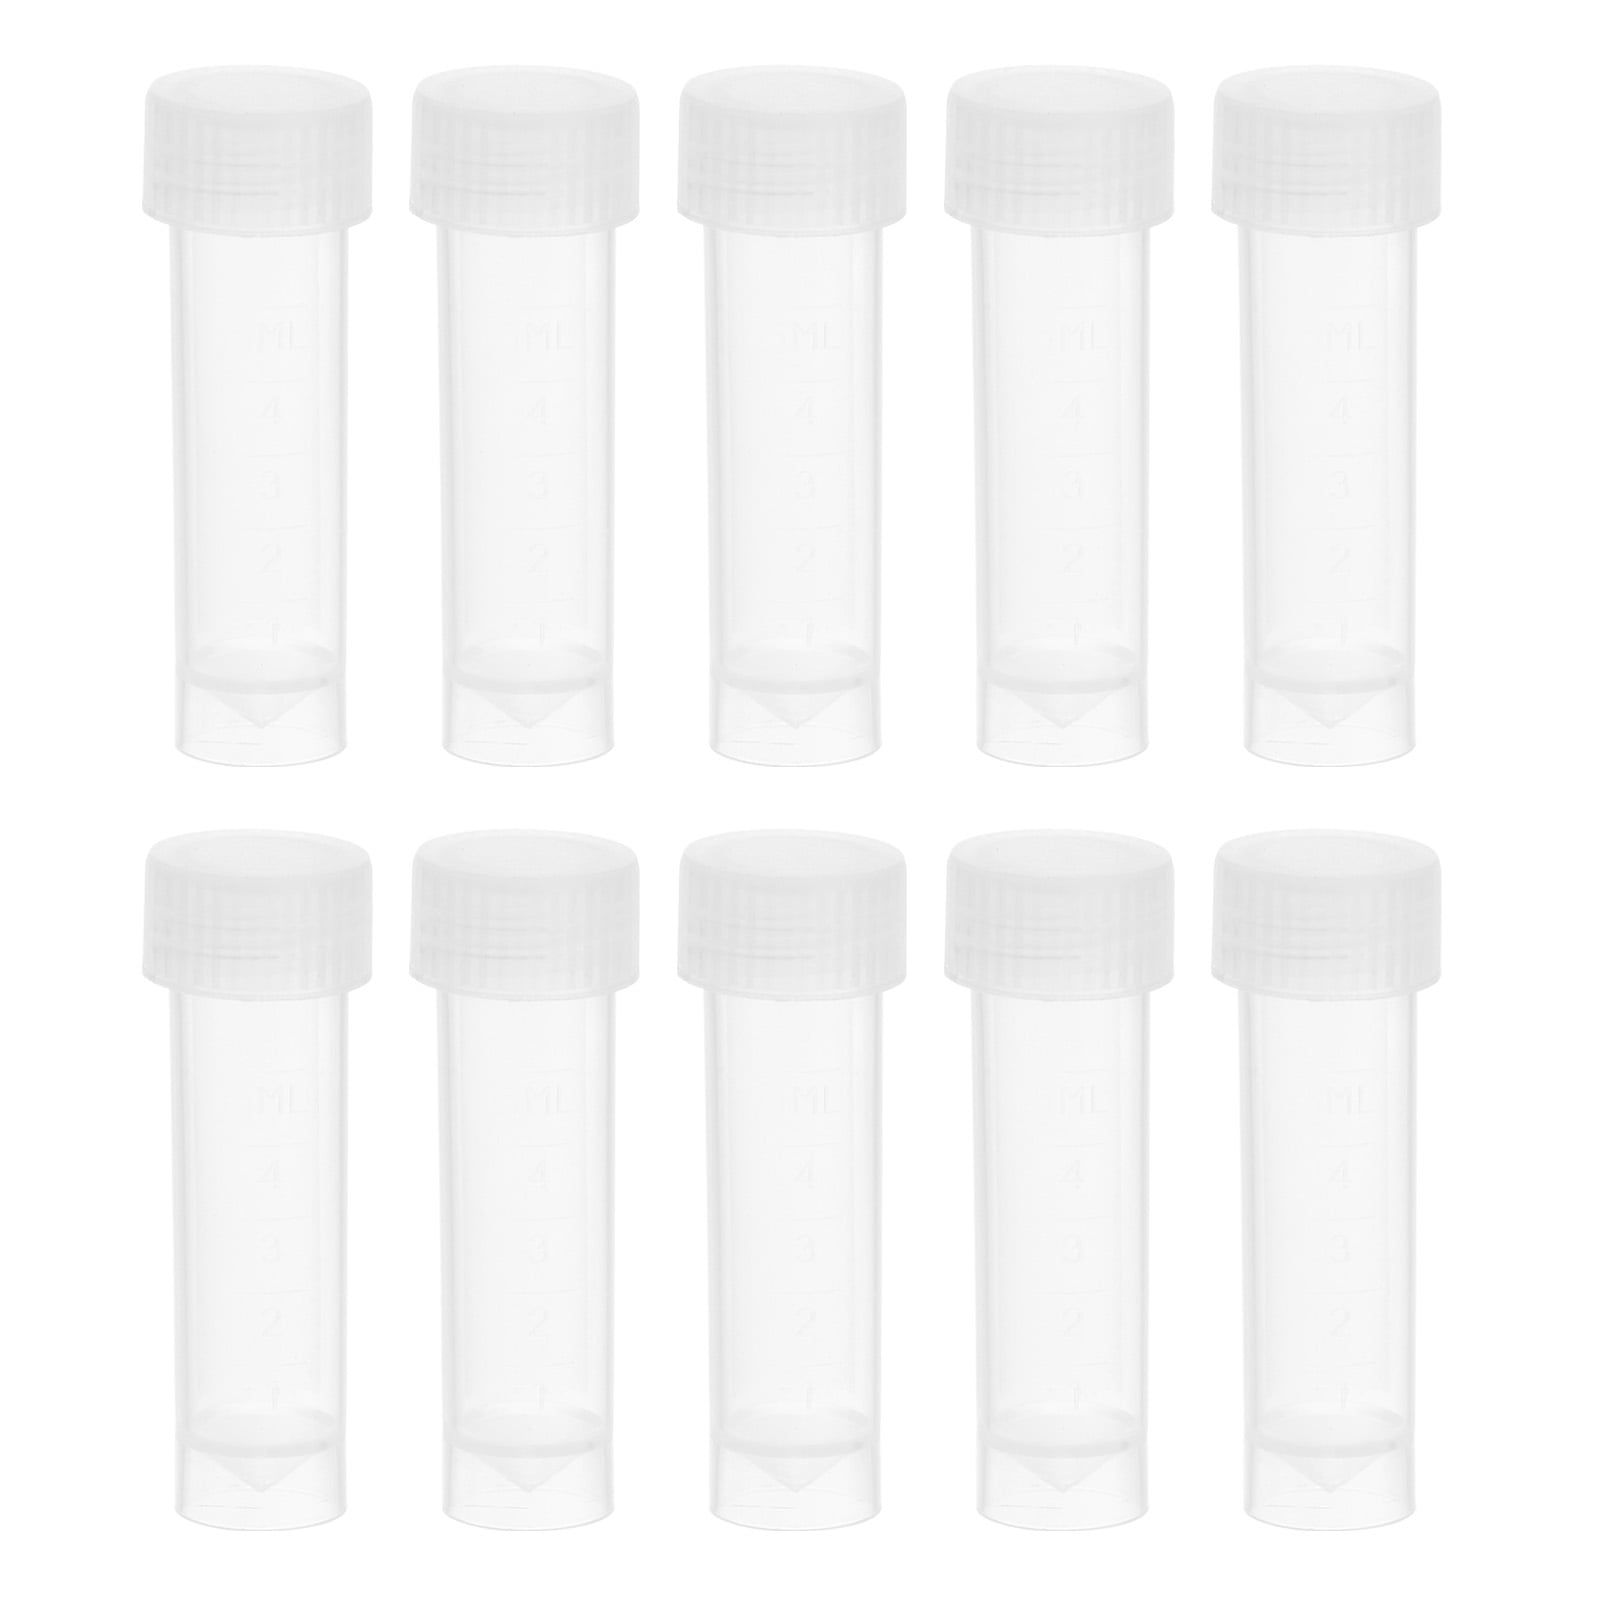 Healifty 10pcs Clear Plastic Needles Storage Tubes Sewing Needle Container Holder Organizer with Cap 